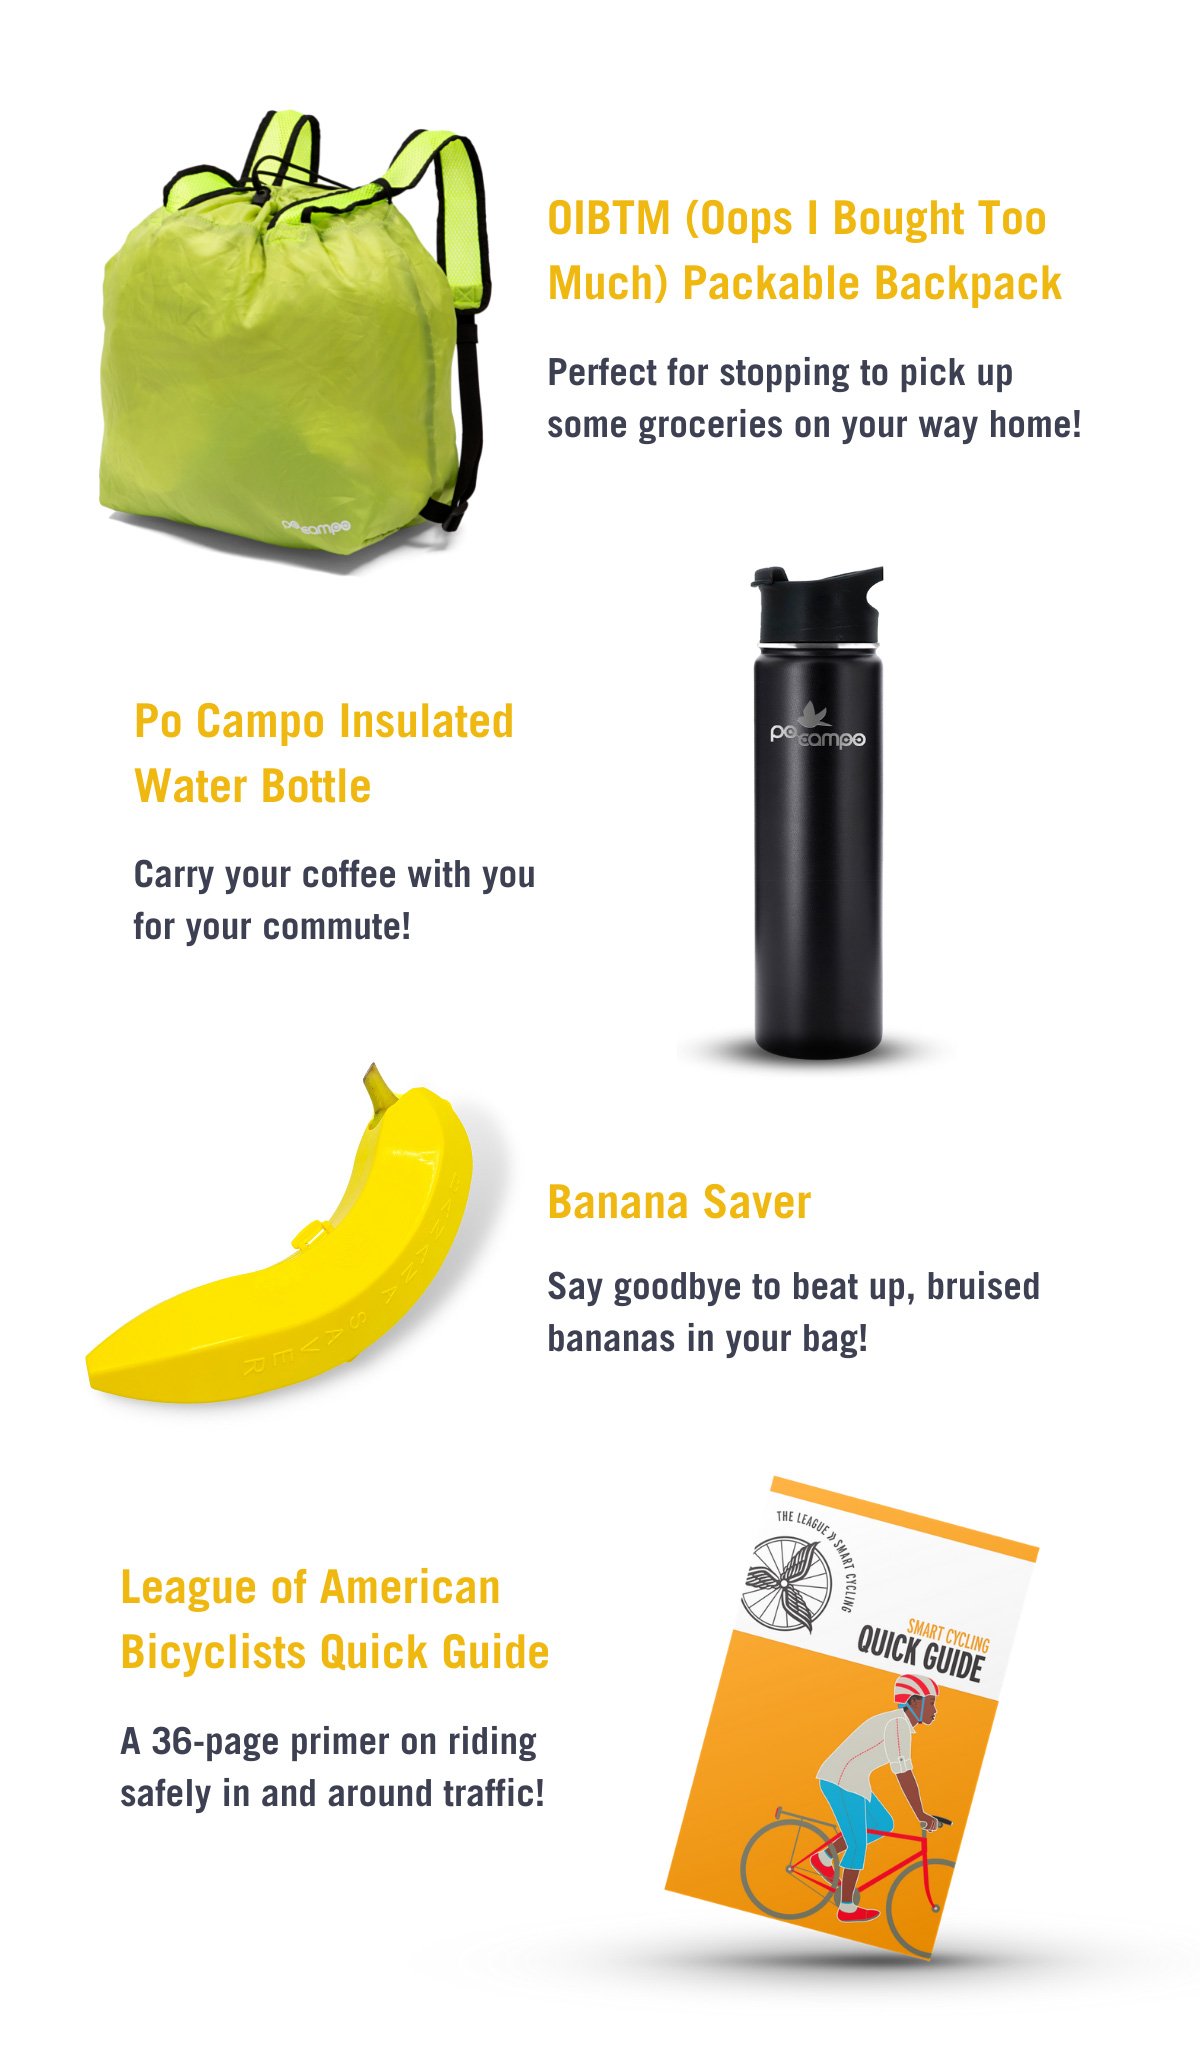 OIBTM (Oops I Bought Too Much) Packable Backpack. Perfect for stopping to pick up some groceries on your way home!. Po Campo Insulated Water Bottle. Carry your coffee with you for your commute! Banana Saver. Say goodbye to beat up, bruised bananas in your bag! League of American Bicyclists Quick Guide. A 36-page primer on riding safely in and around traffic!